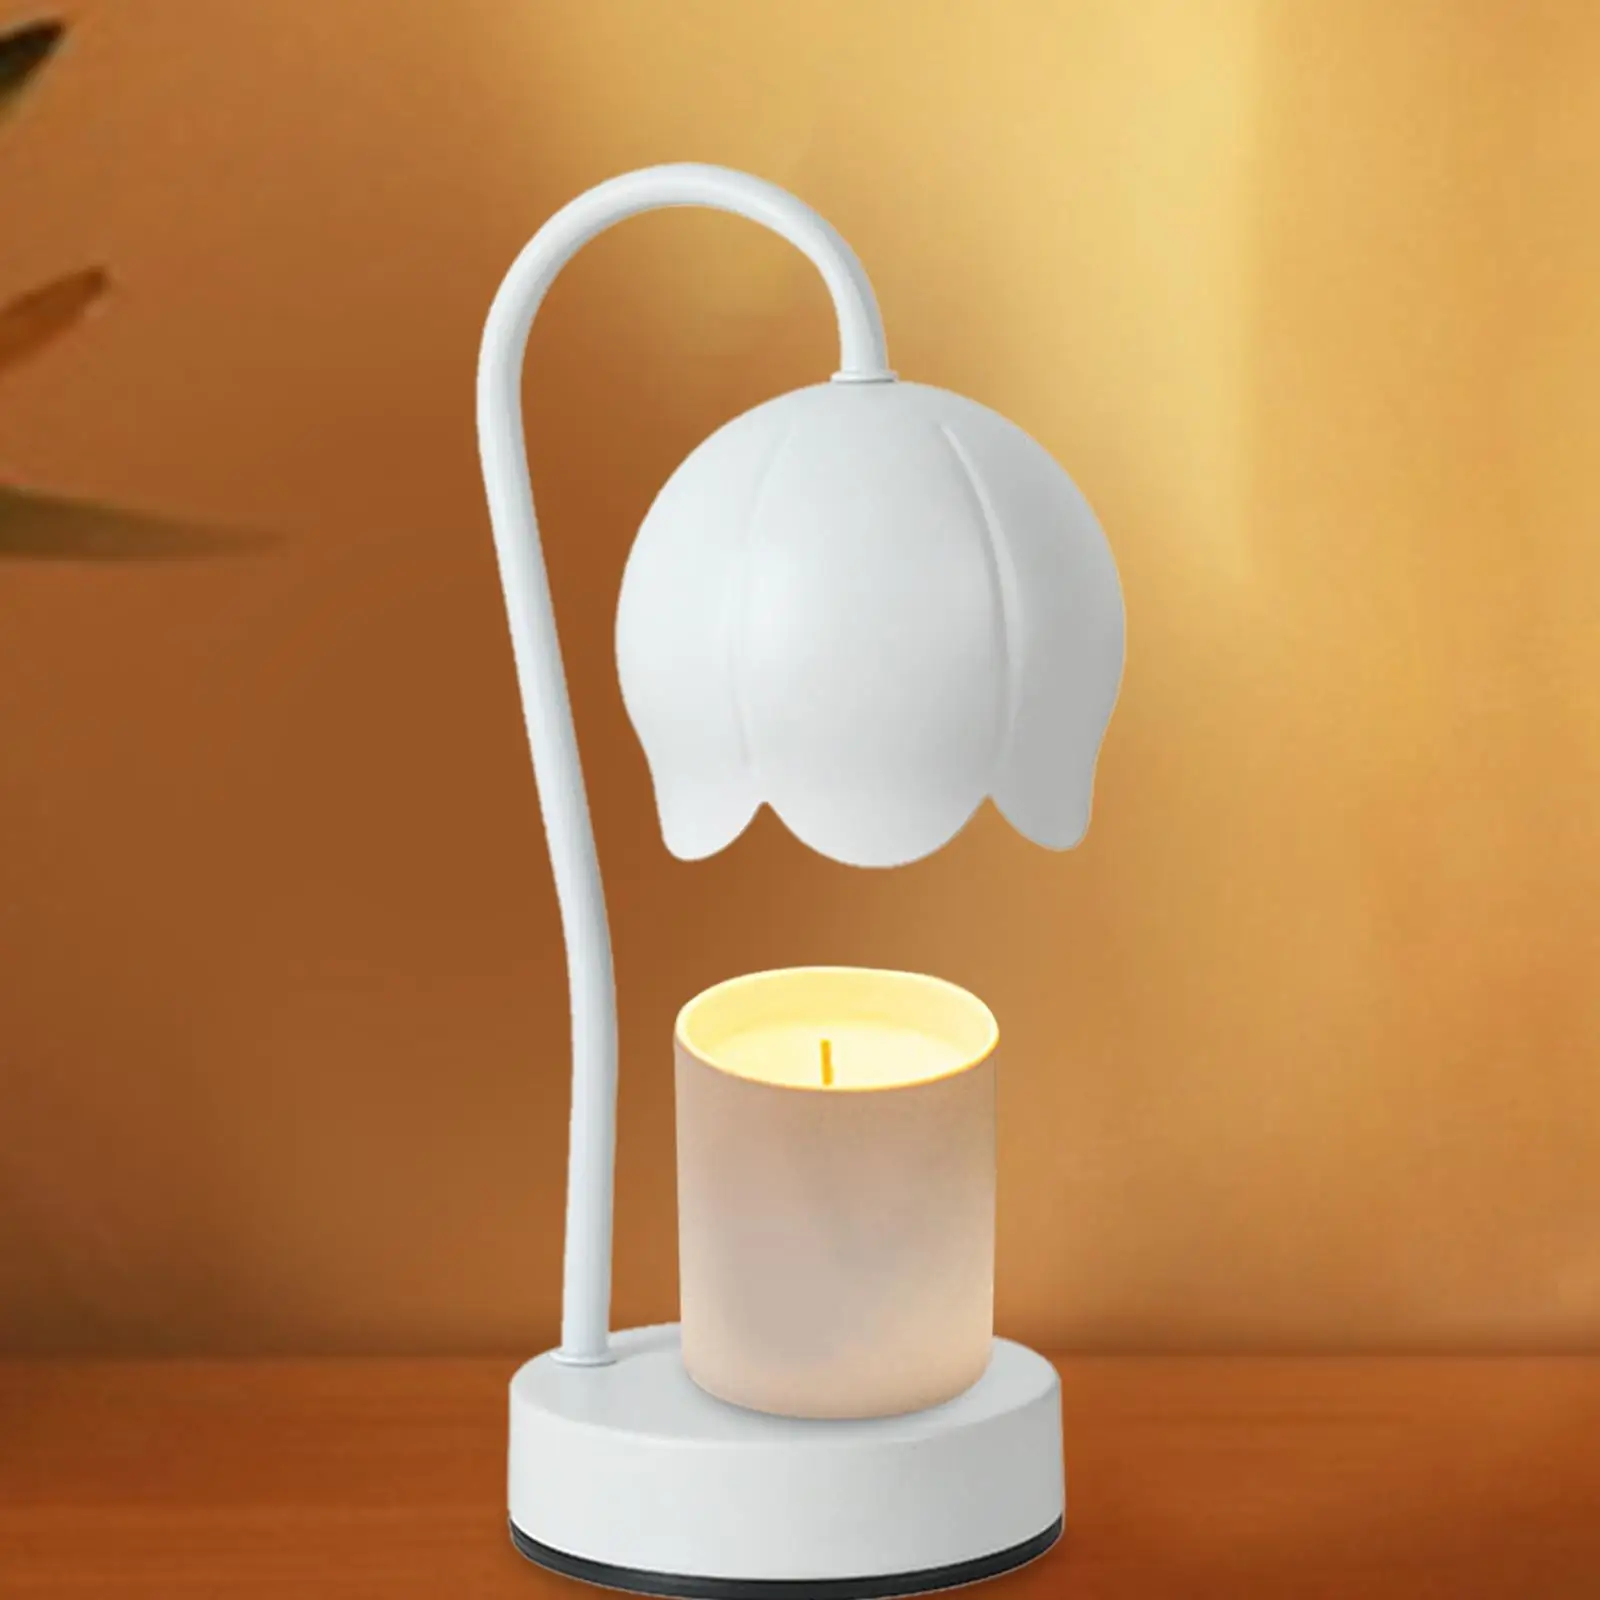 Electric Candle Warmer Lamp Desk Light Burner Lamp Ornament for Jar Candles Candle Heater Lamp for Cafe Centerpiece Gift